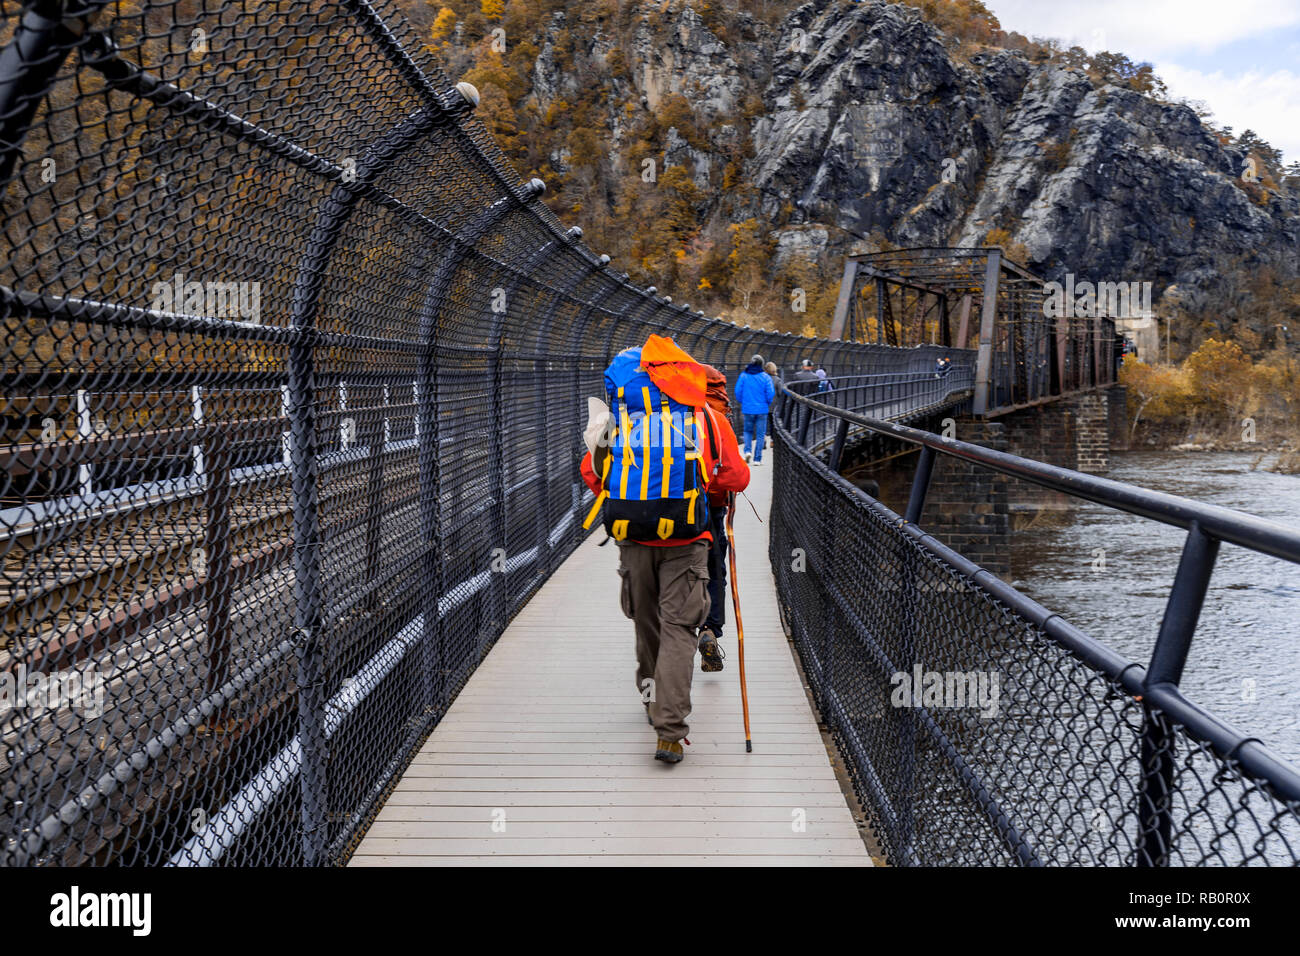 Harpers Ferry, WV, USA - November 3, 2018: The Appalachian trail crossing the Shenandoah River in Harpers Ferry. Stock Photo